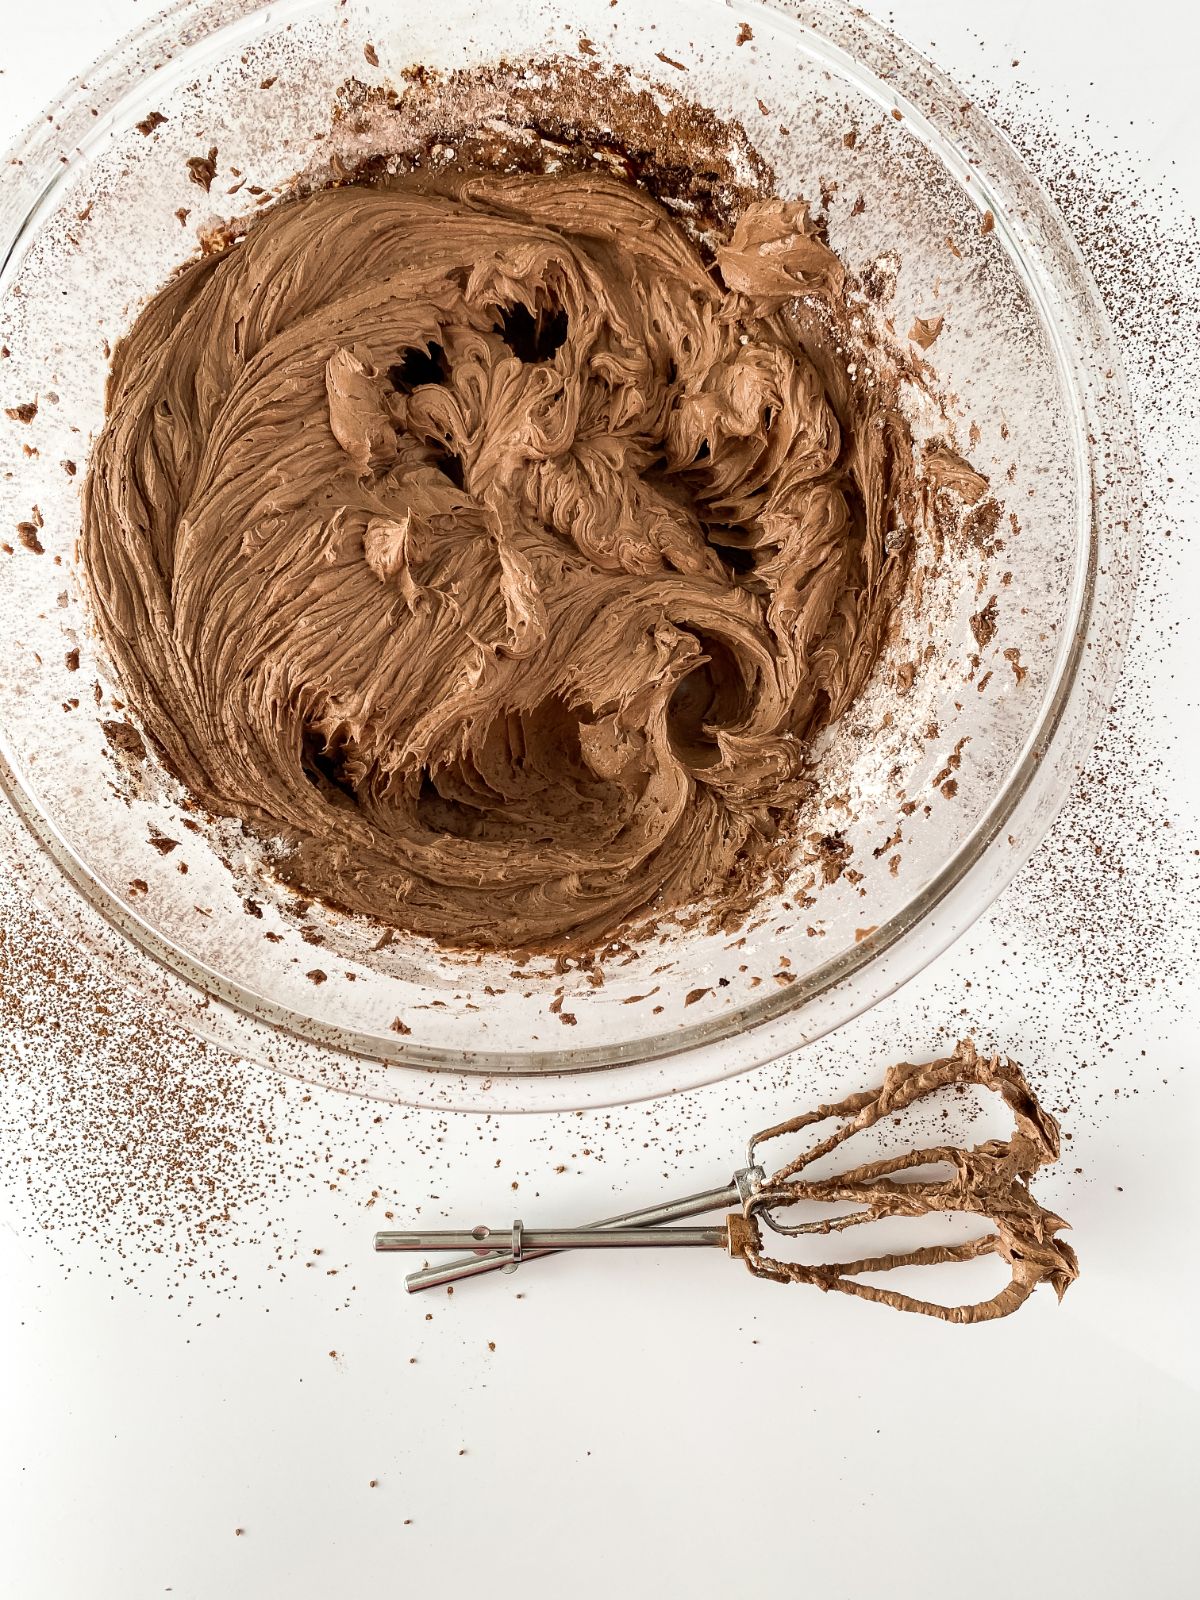 bowl of chocolate frosting on table with dusting of cocoa beside bowl